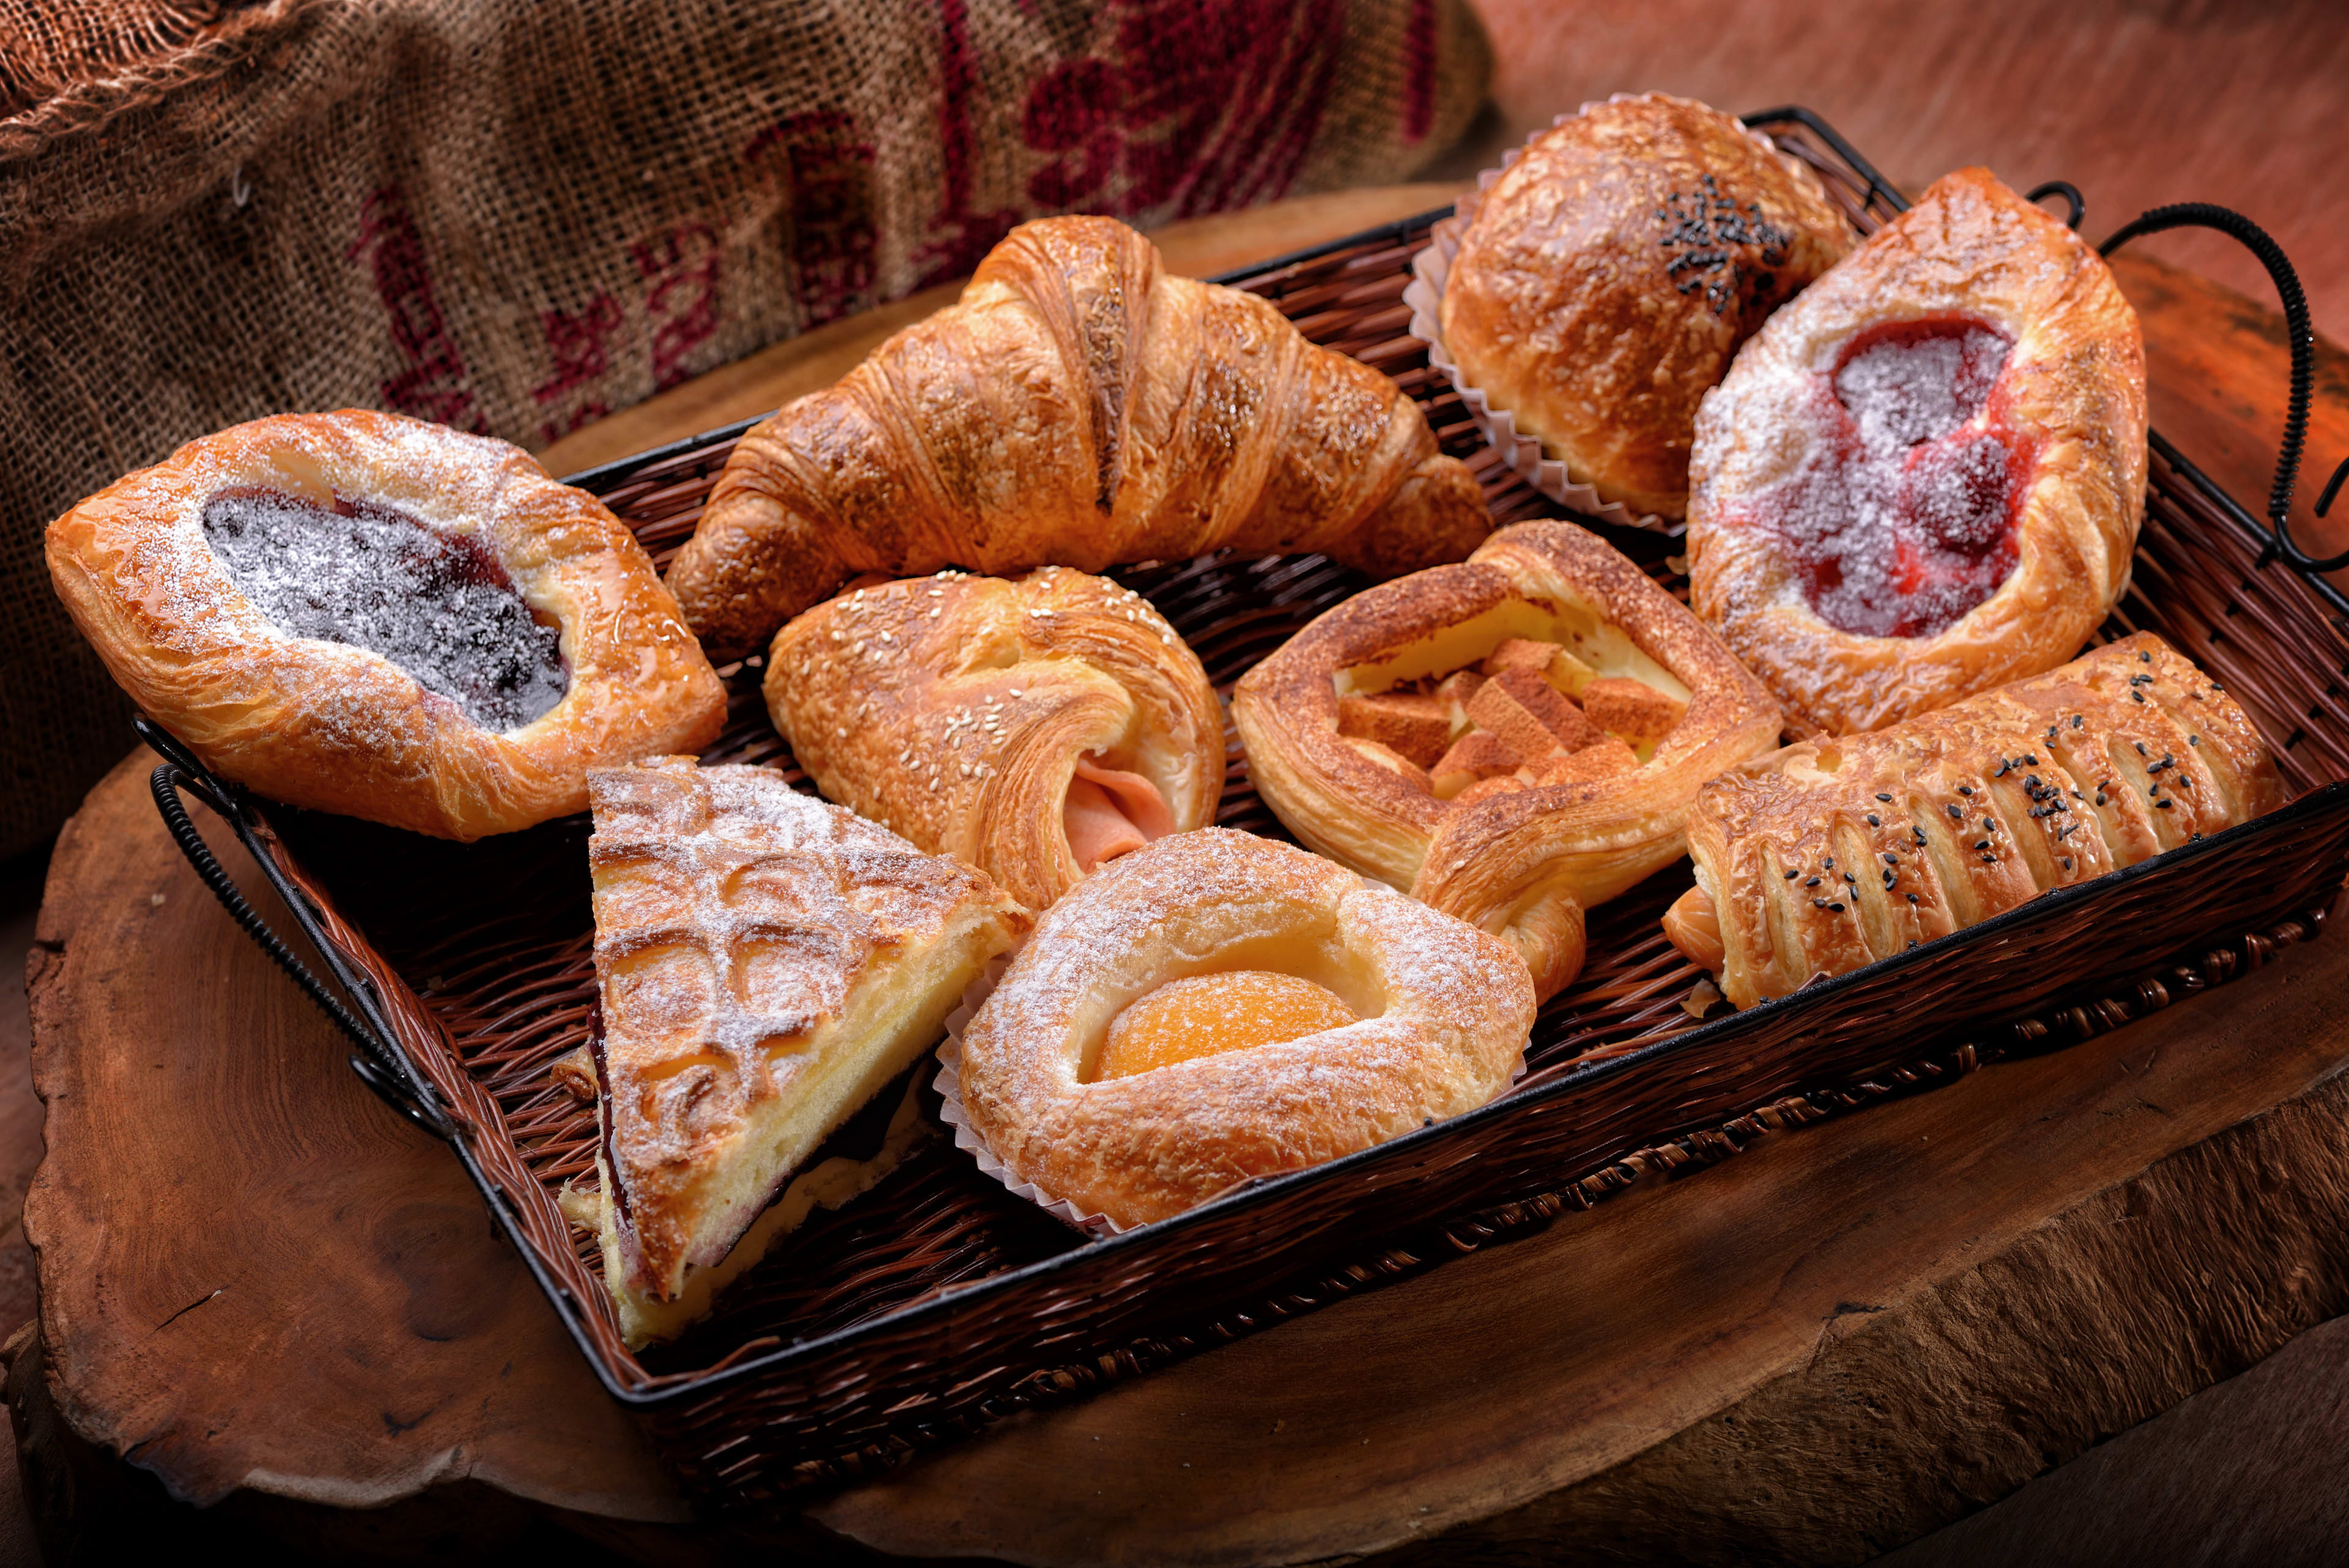 Tray of pastries and desserts